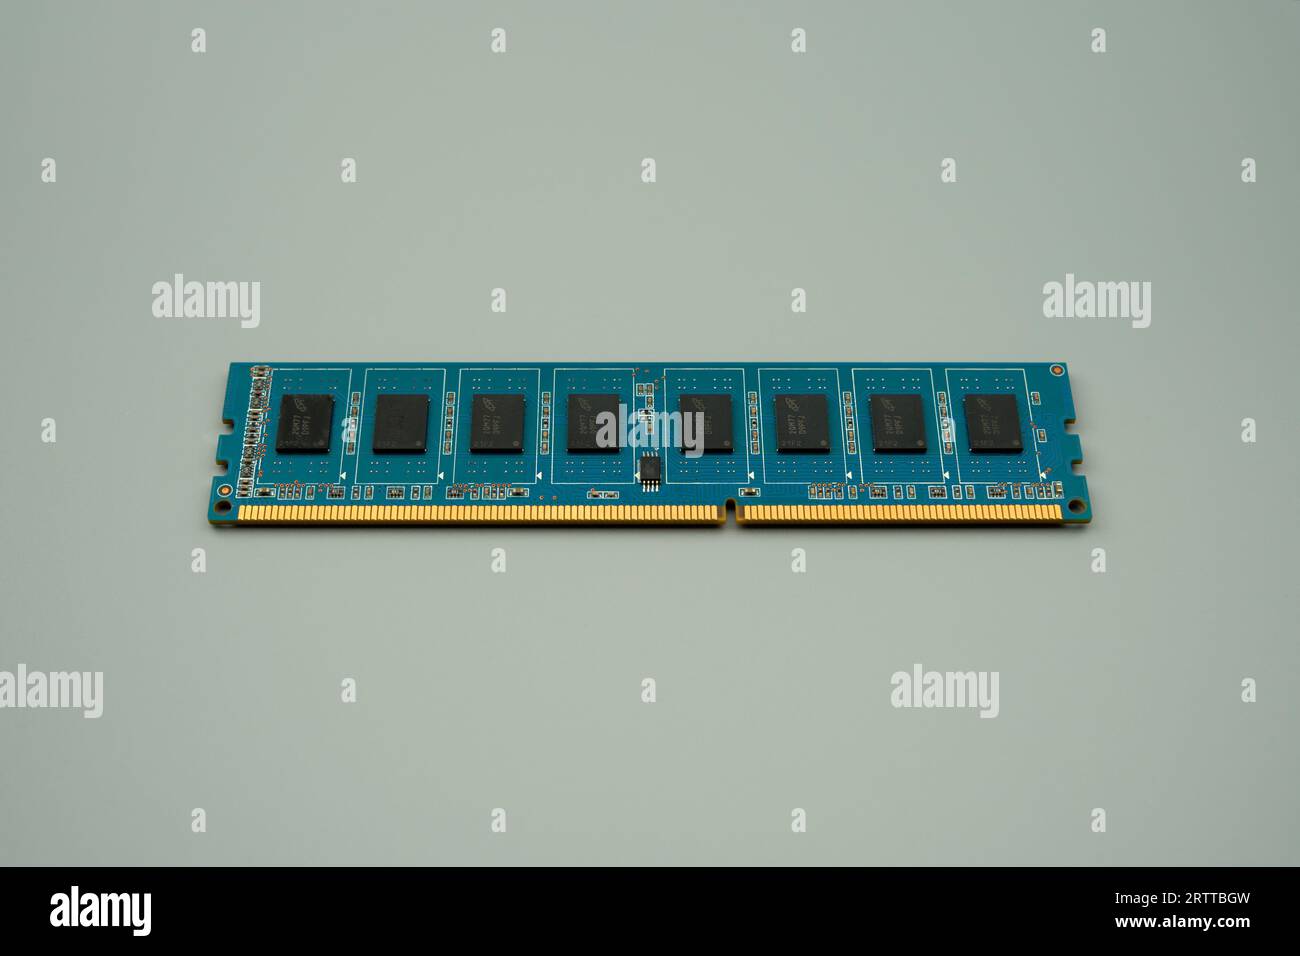 DDR3 memory on a blue PCB, gray background Stock Photo